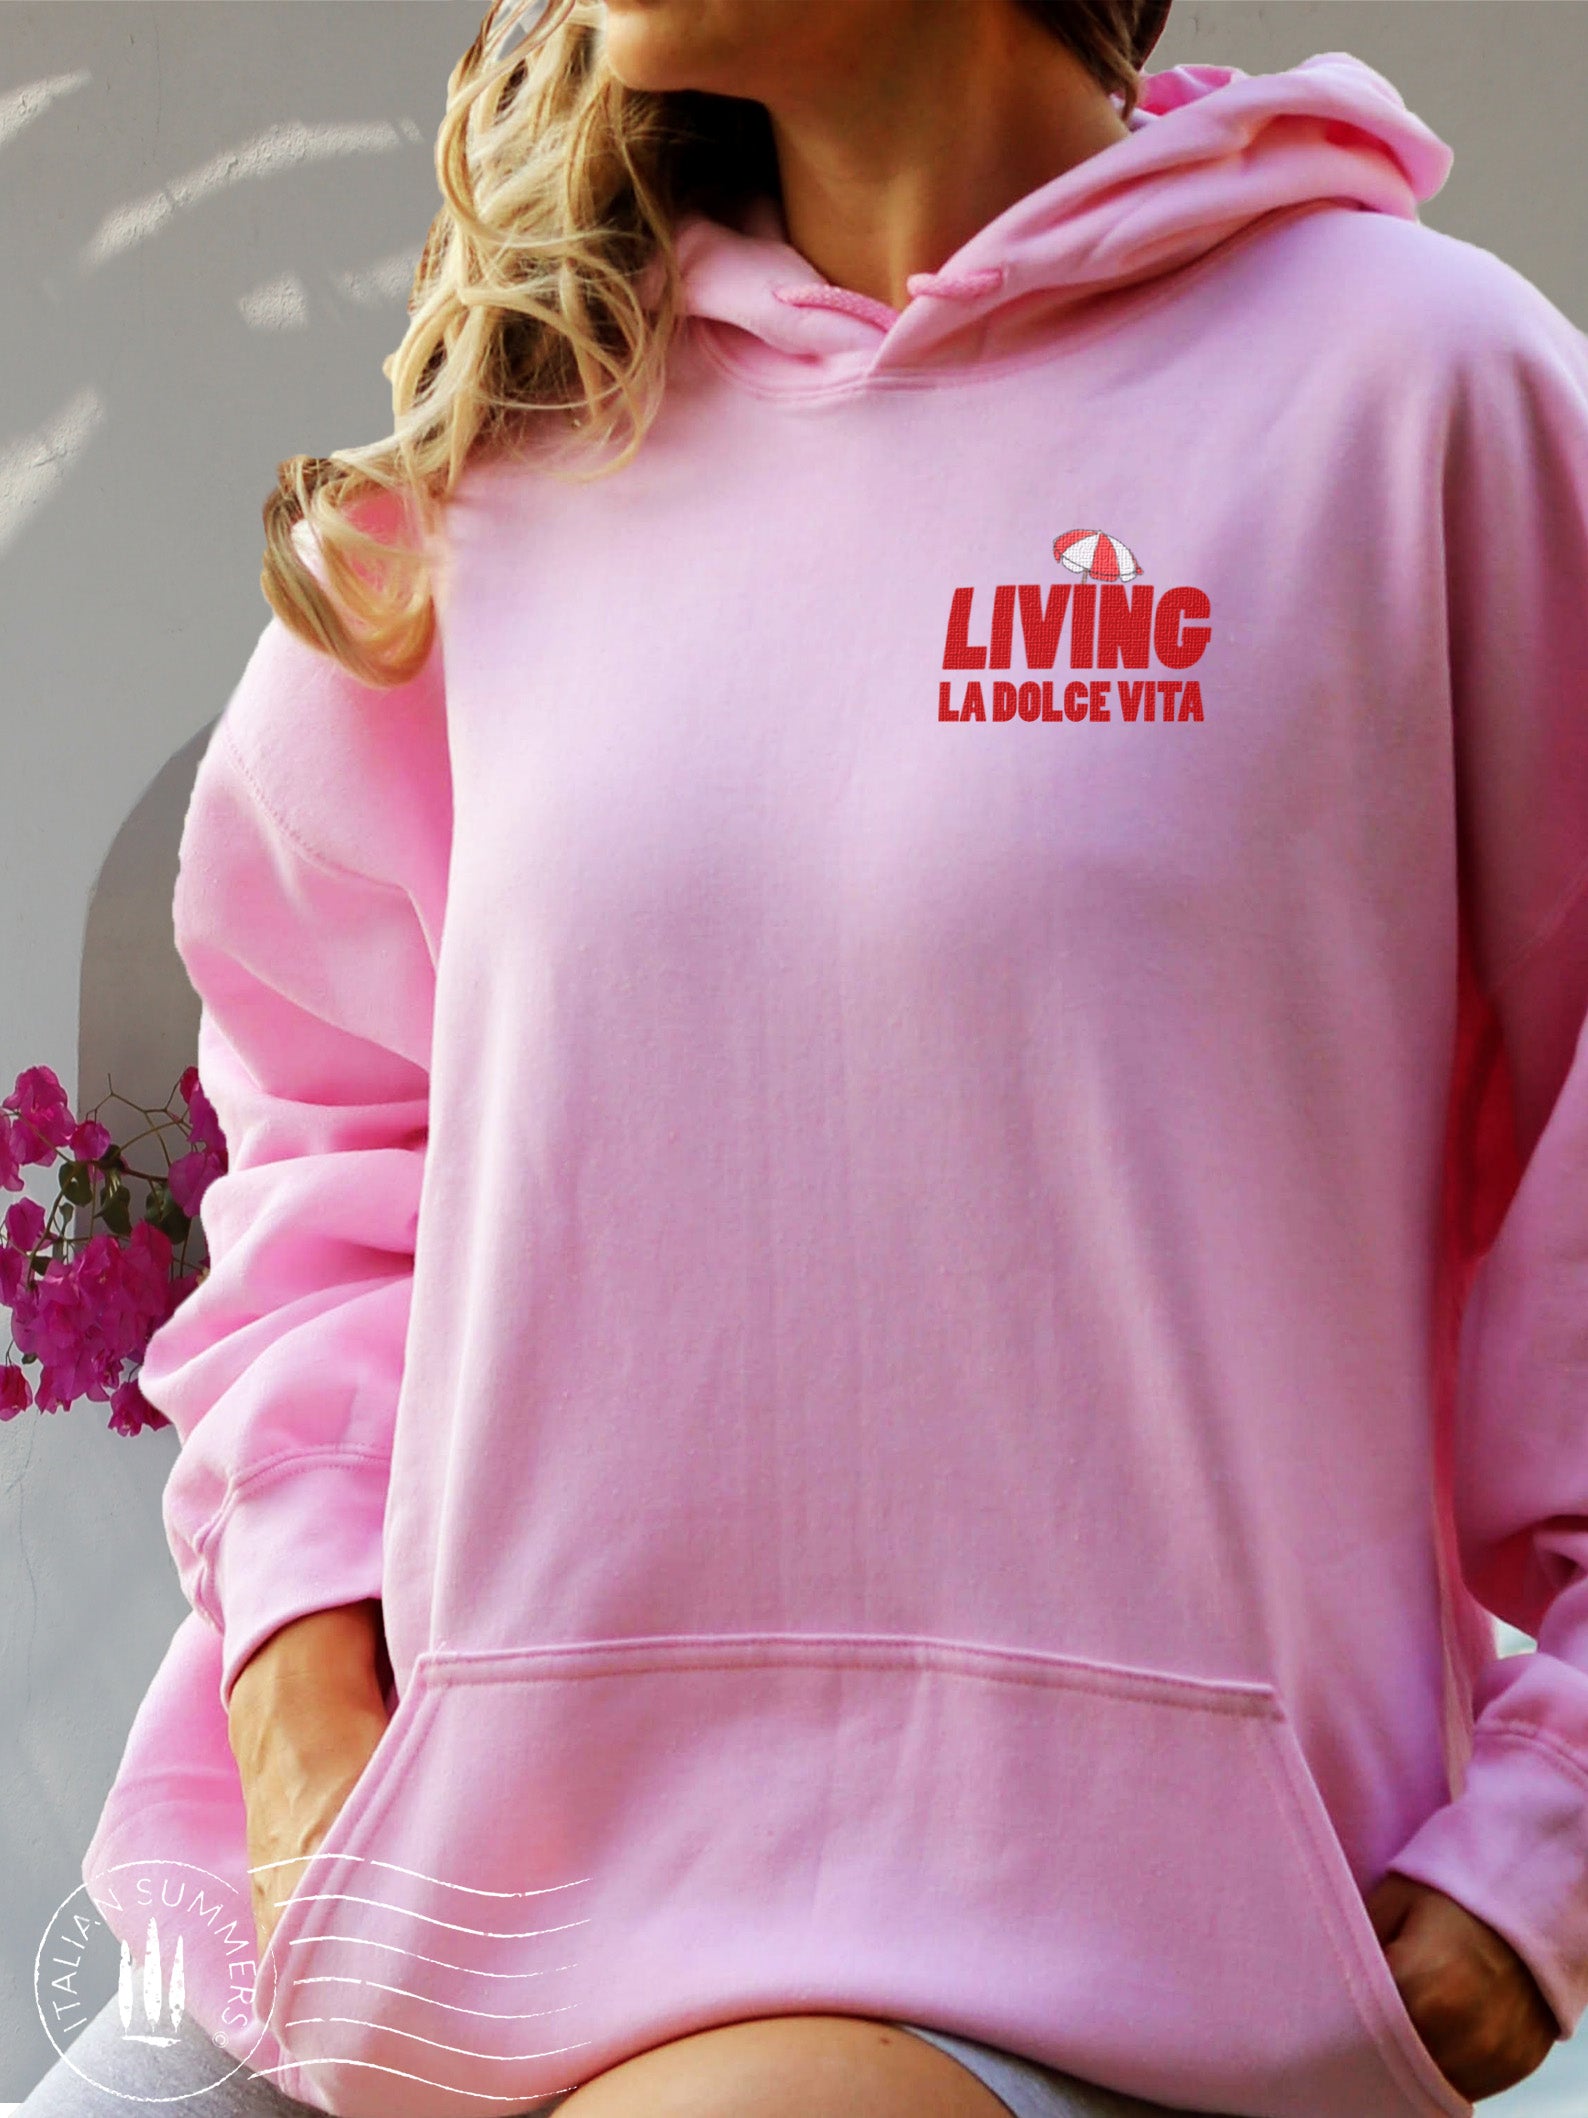 A n Italy-inspired, soft and comfortable made to order  Hoodie . Pink cotton blend with an embroidered red decoration text  LIVING LA DOLCE VITA with a red and white beach umbrella on top.  Large print of the same text on the back. Front pocket